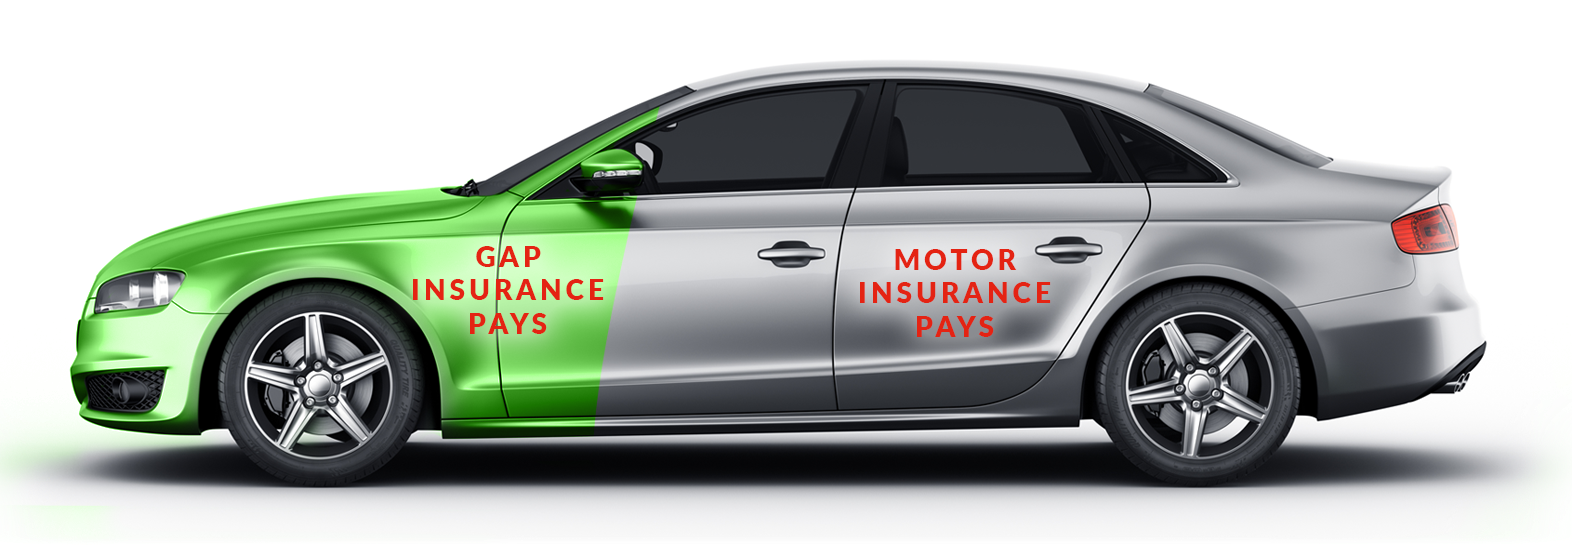 Gap Insurance: Comprehensive Guide on How it Works